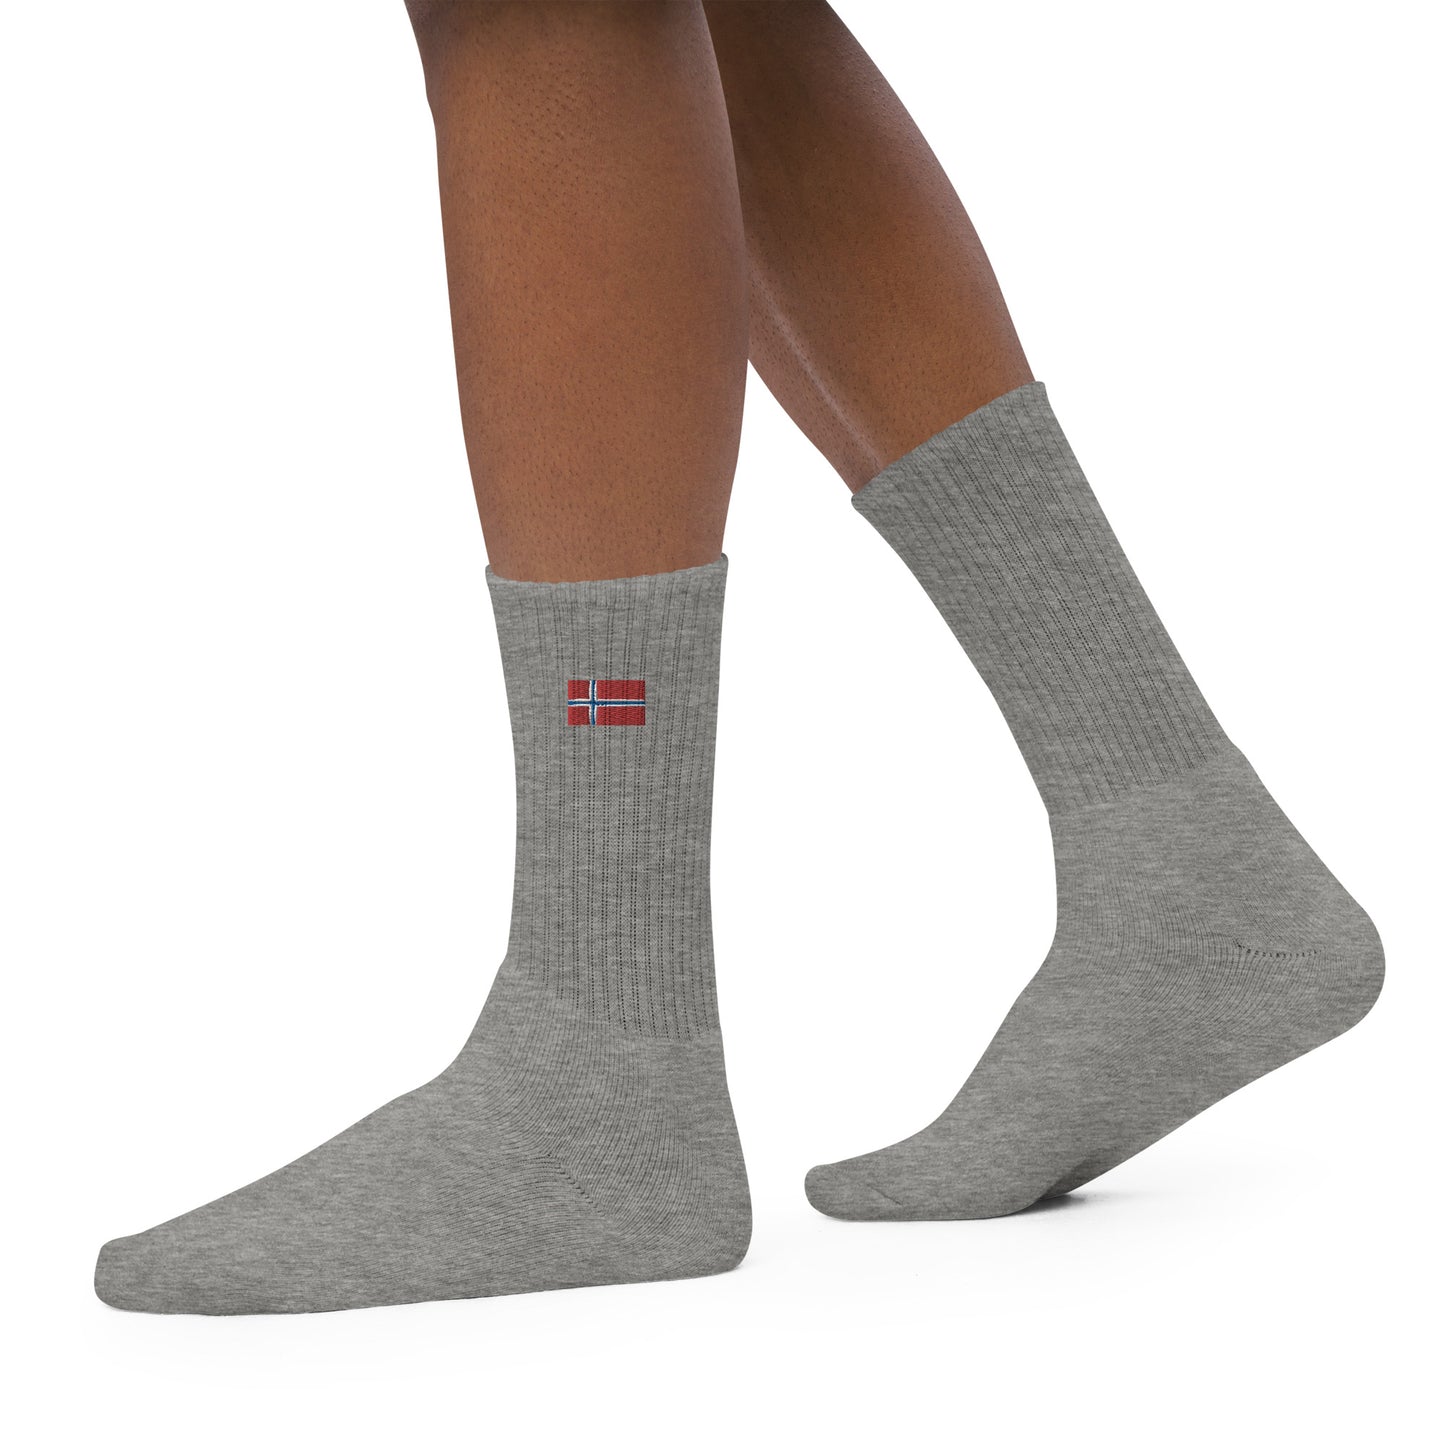 socks-from-the-side-with-a-norwegian flag